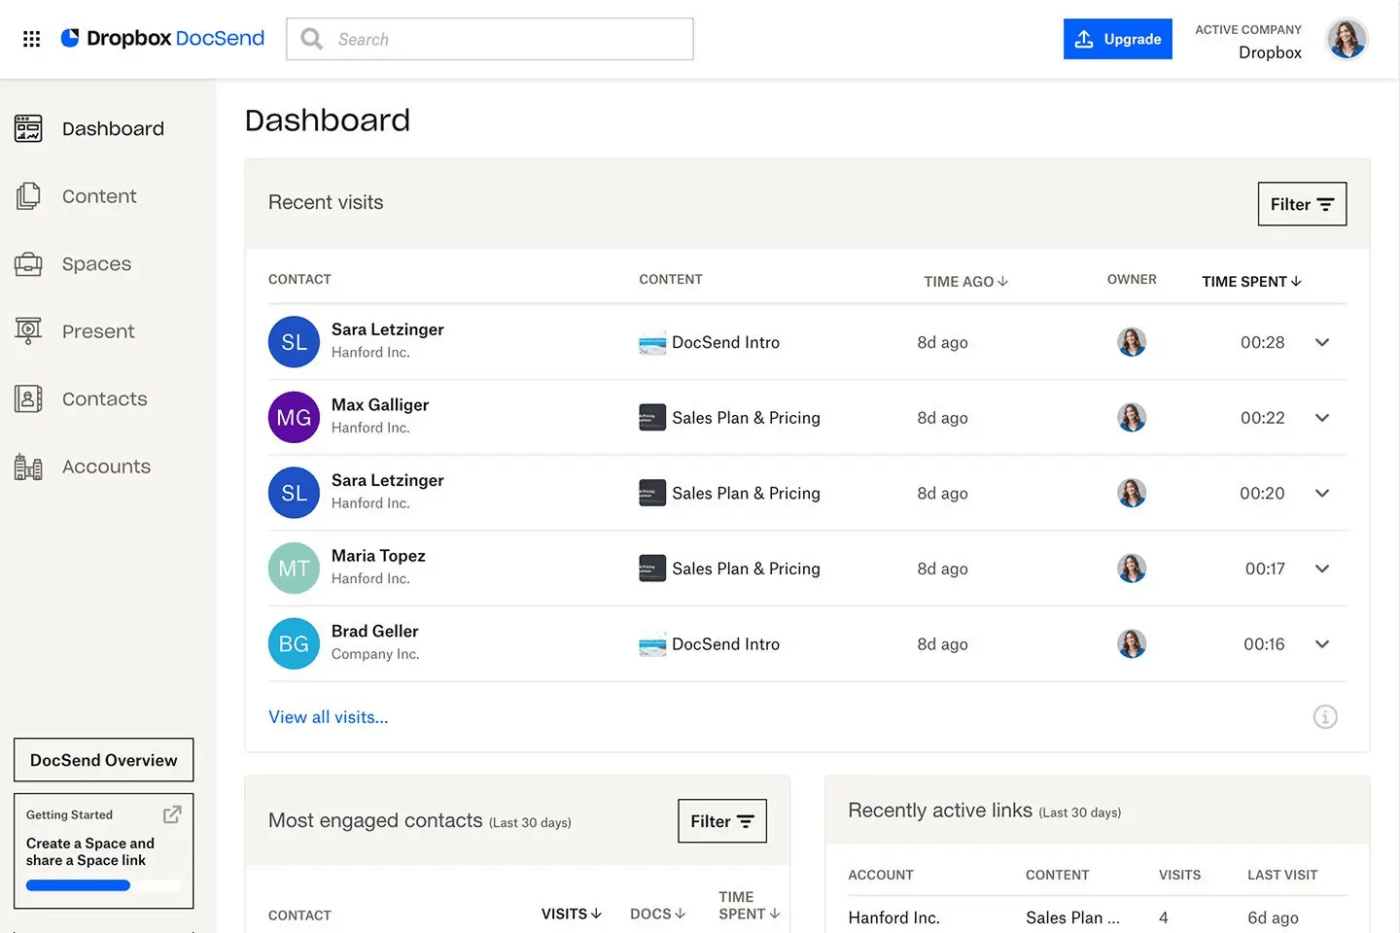 Dropbox is one of the online collaboration tools on our list